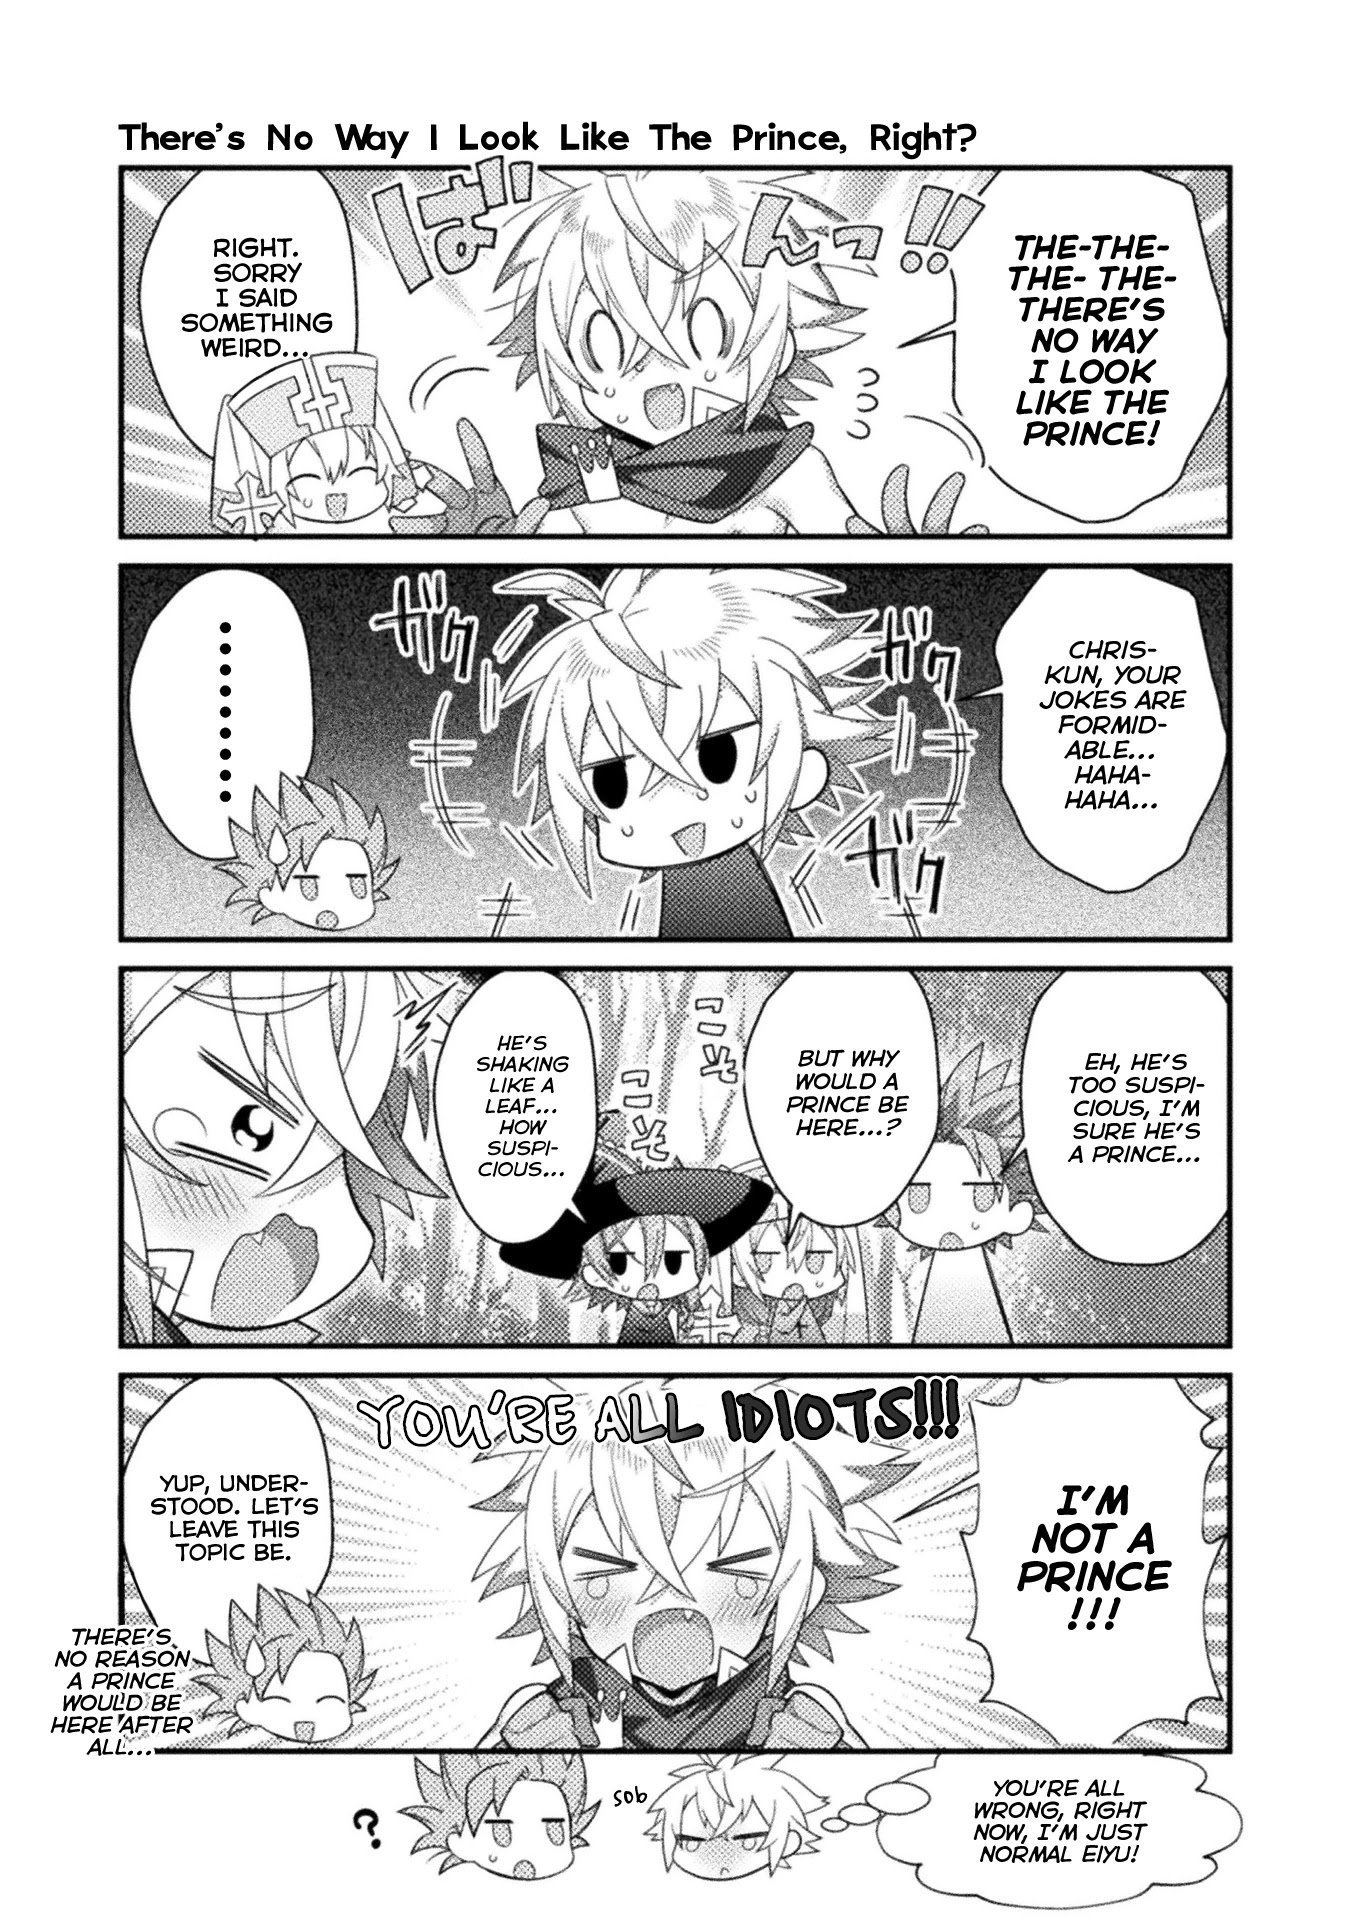 After Reincarnation, My Party Was Full Of Traps, But I'm Not A Shotacon! - 12 page 9